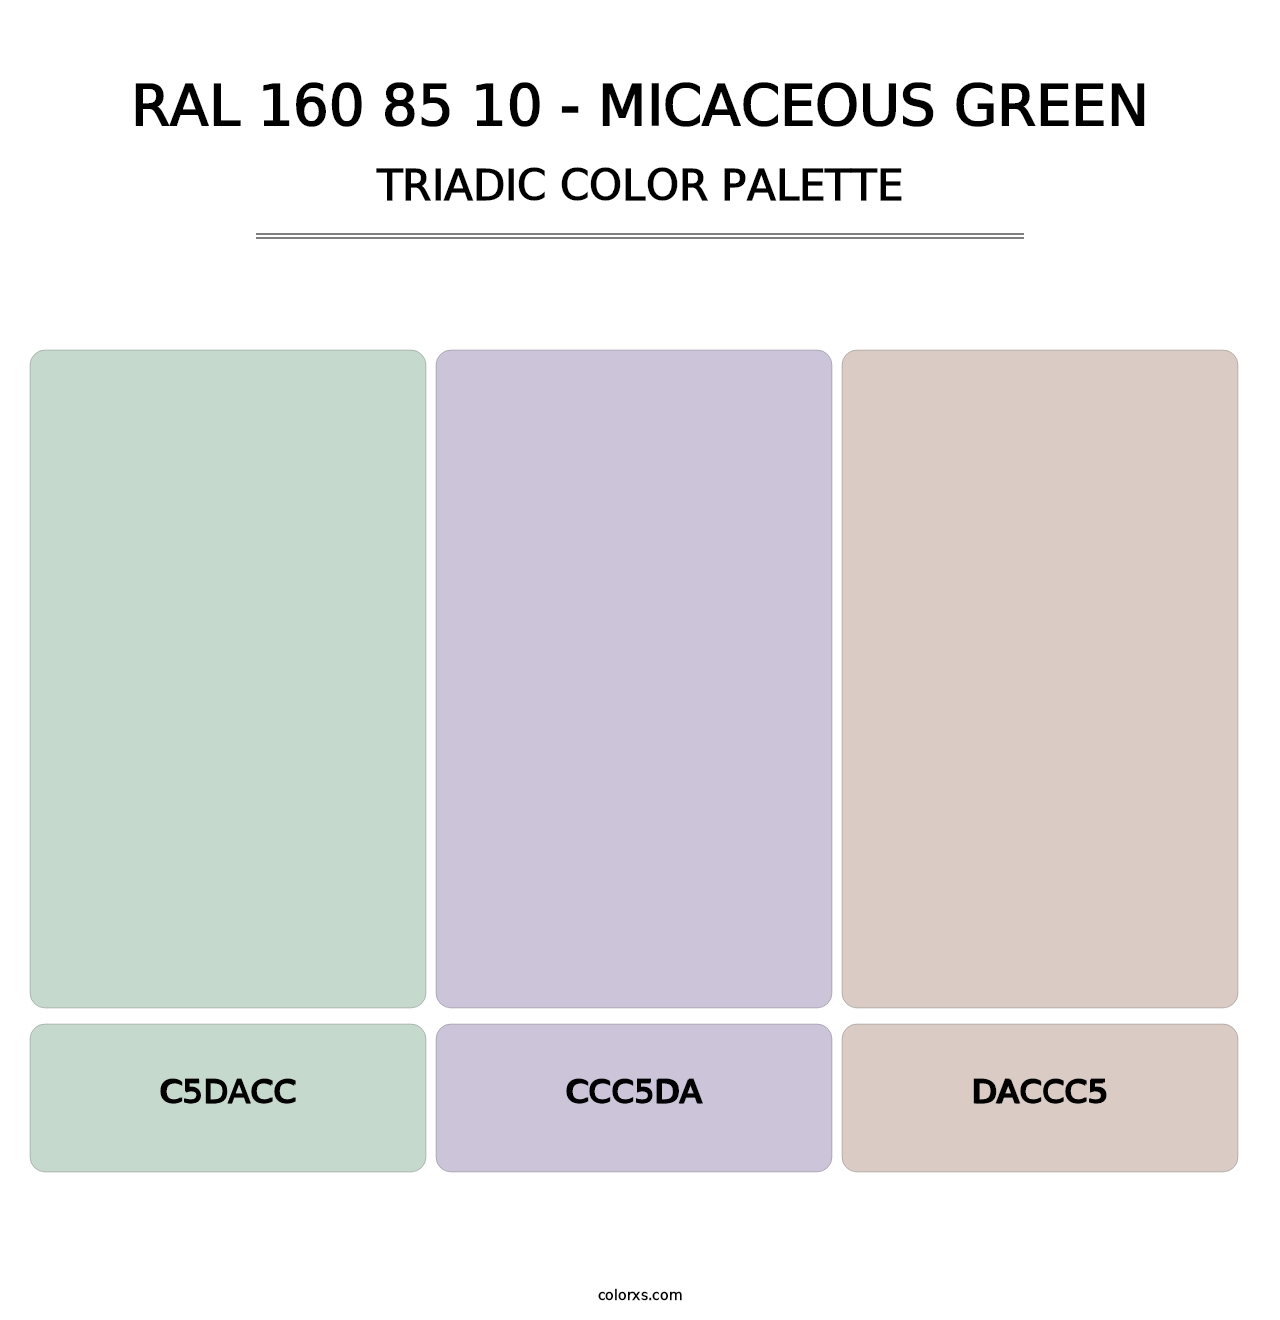 RAL 160 85 10 - Micaceous Green - Triadic Color Palette